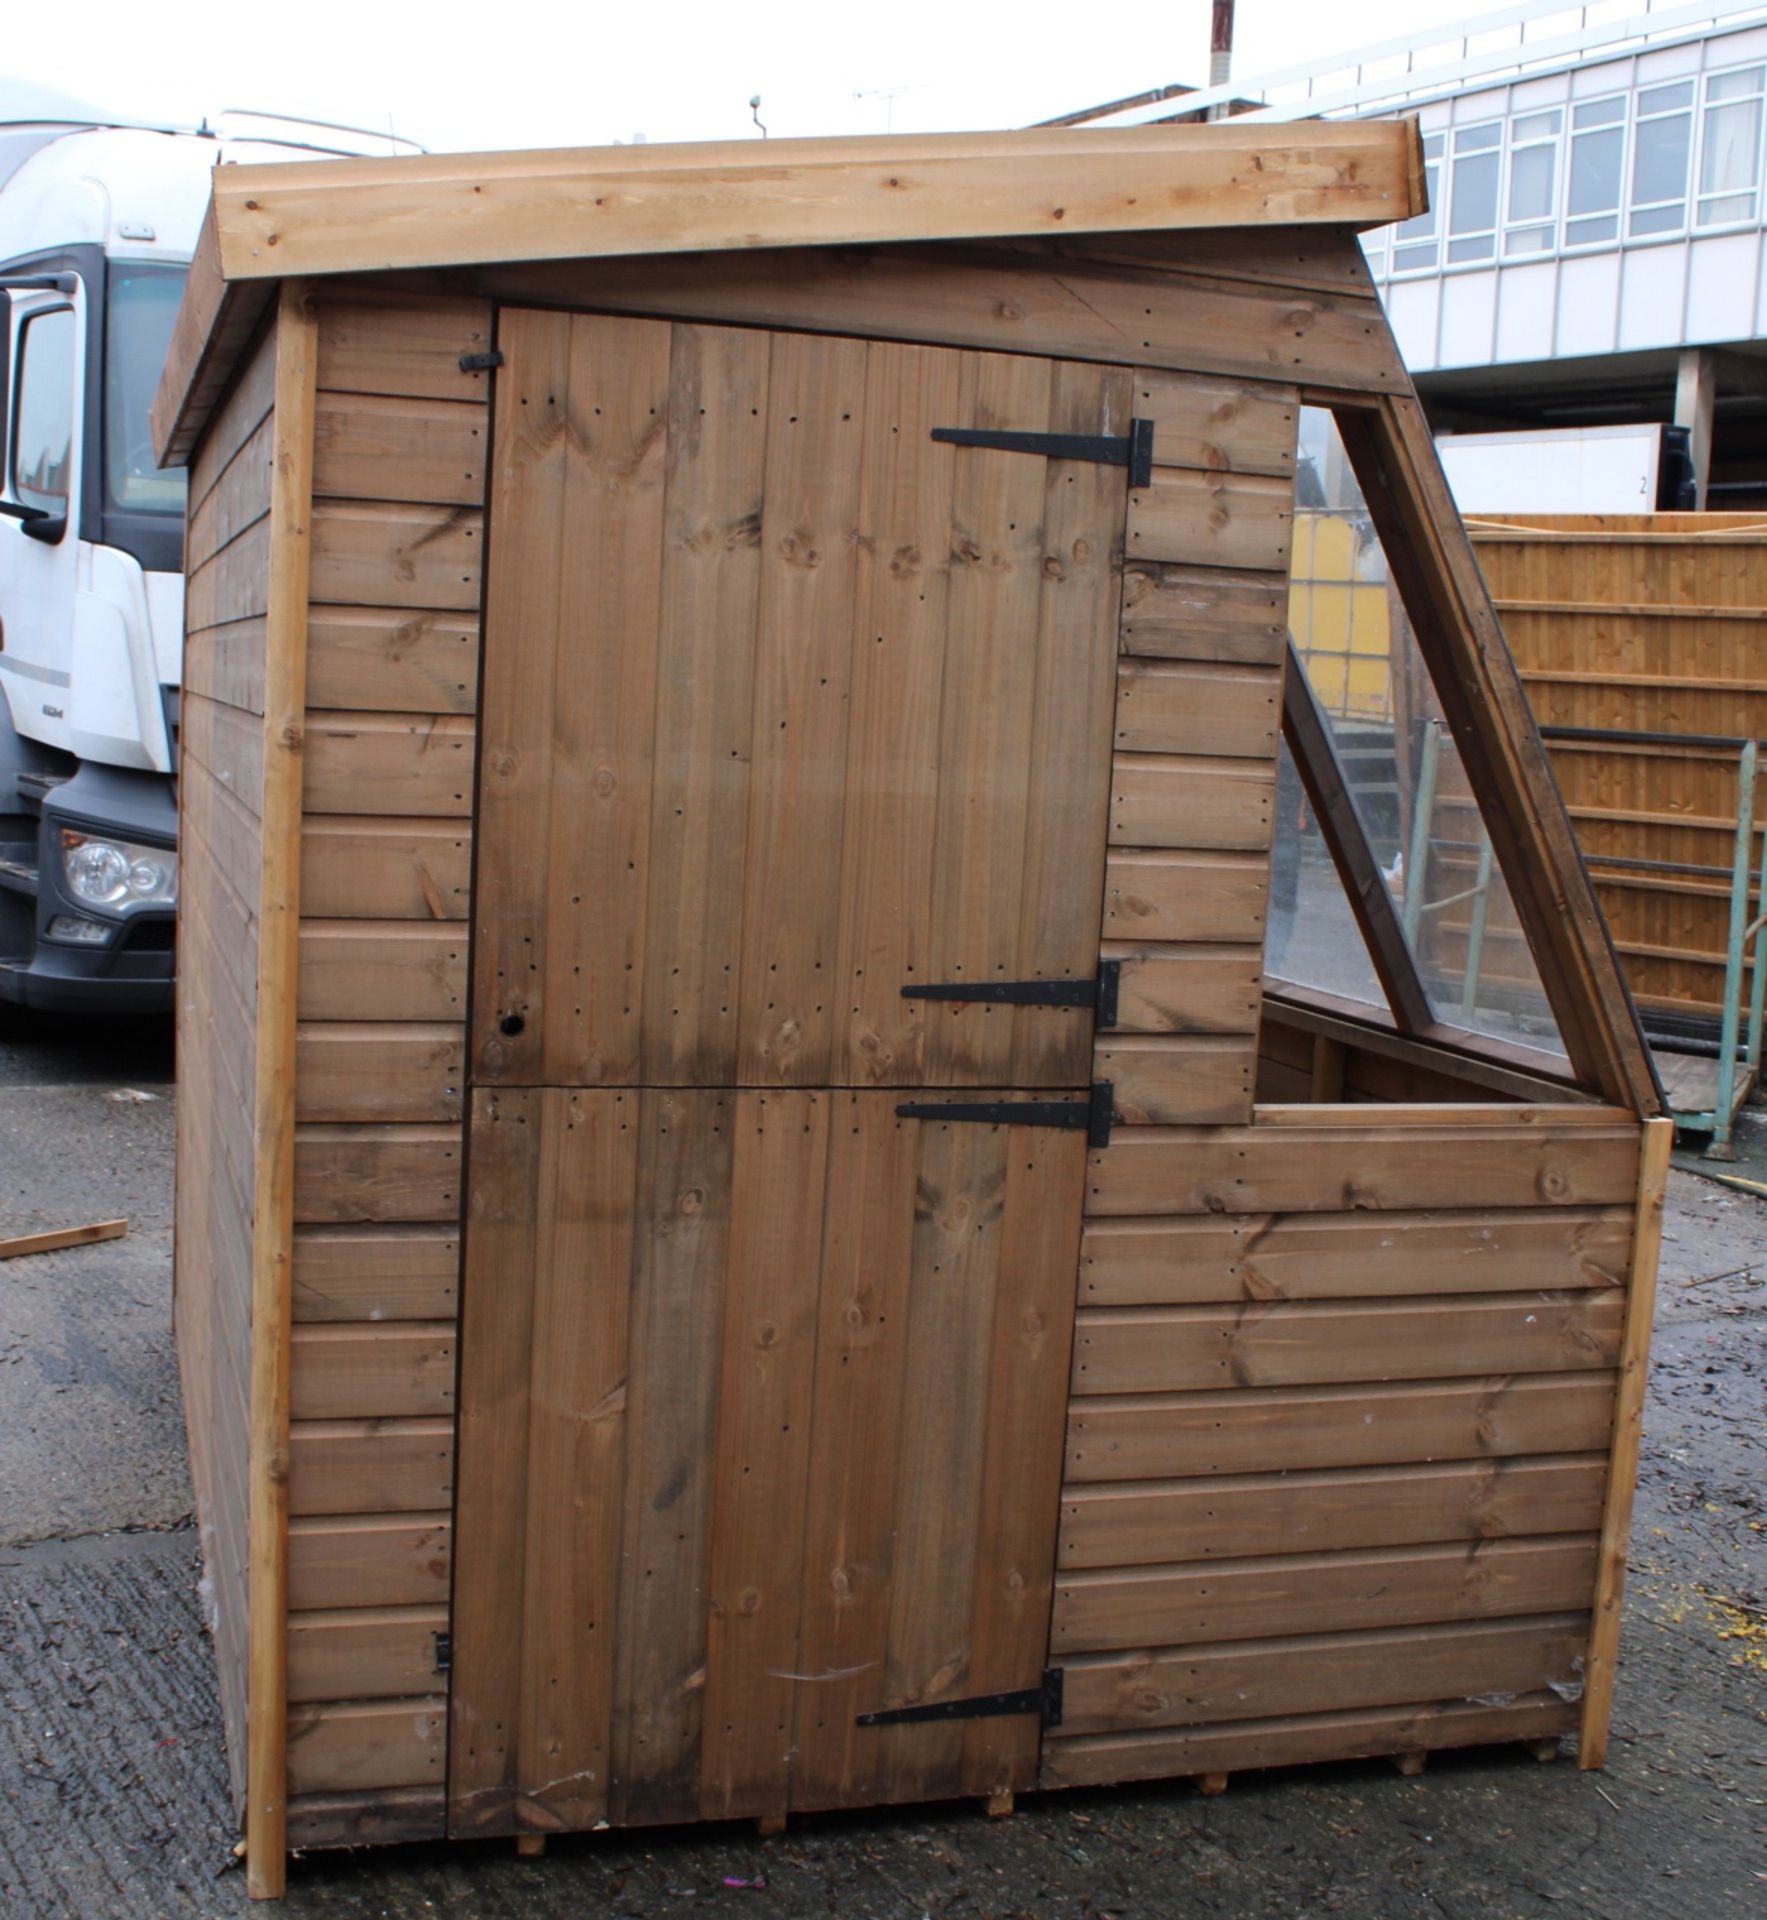 8x6 Exdisplay potting shed, Standard 16mm Nominal Cladding RRP£1,500 - Image 2 of 6